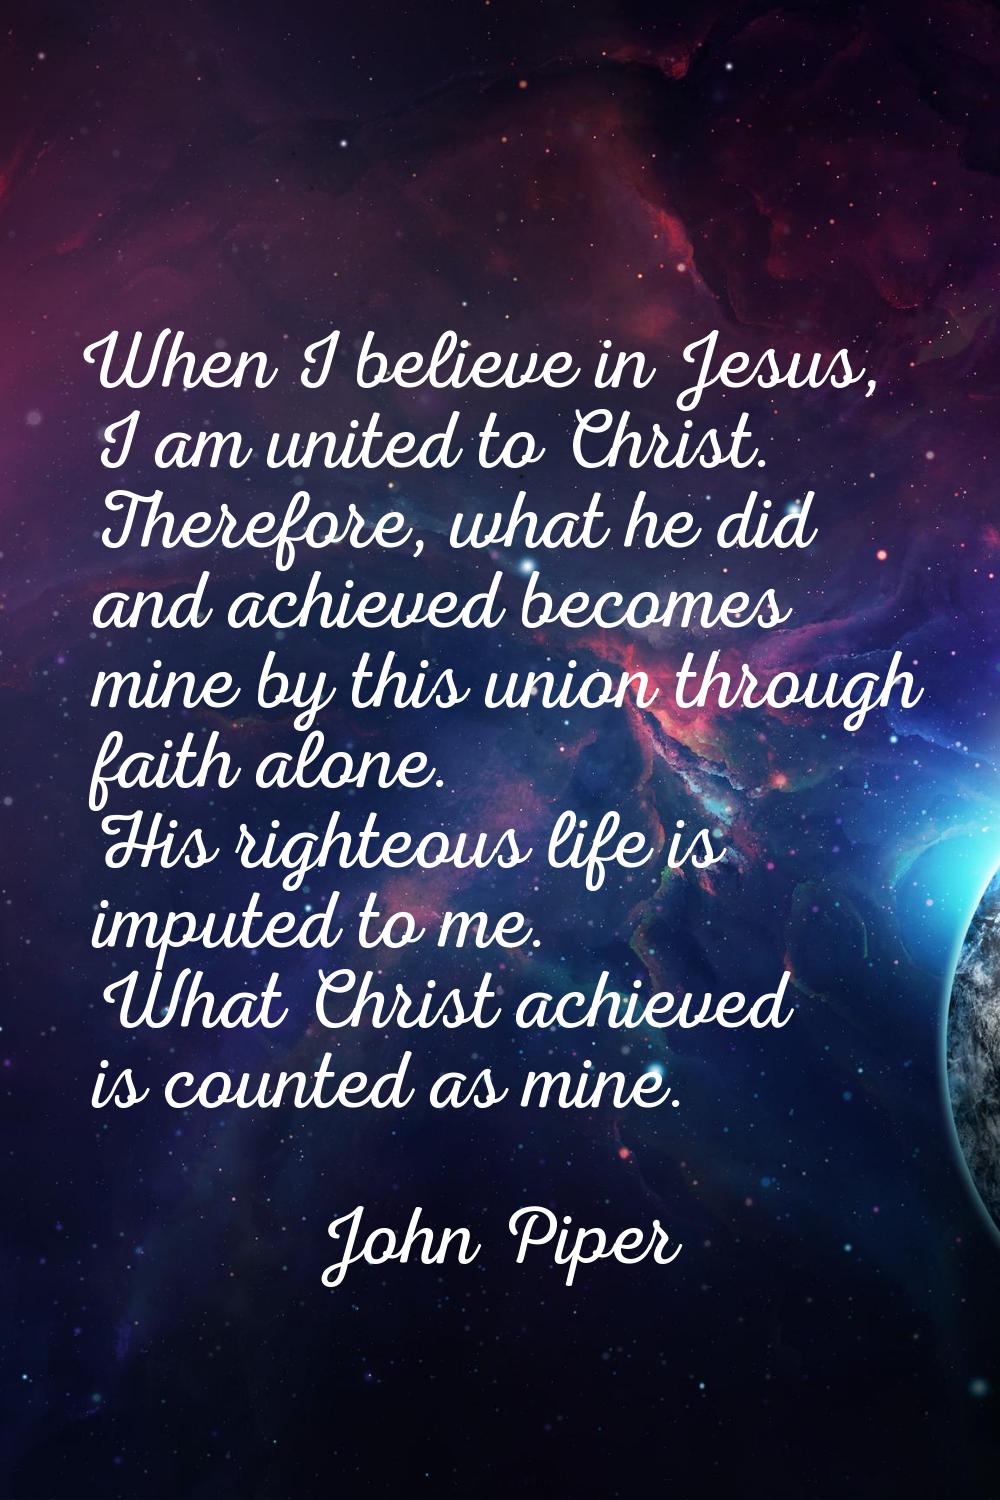 When I believe in Jesus, I am united to Christ. Therefore, what he did and achieved becomes mine by